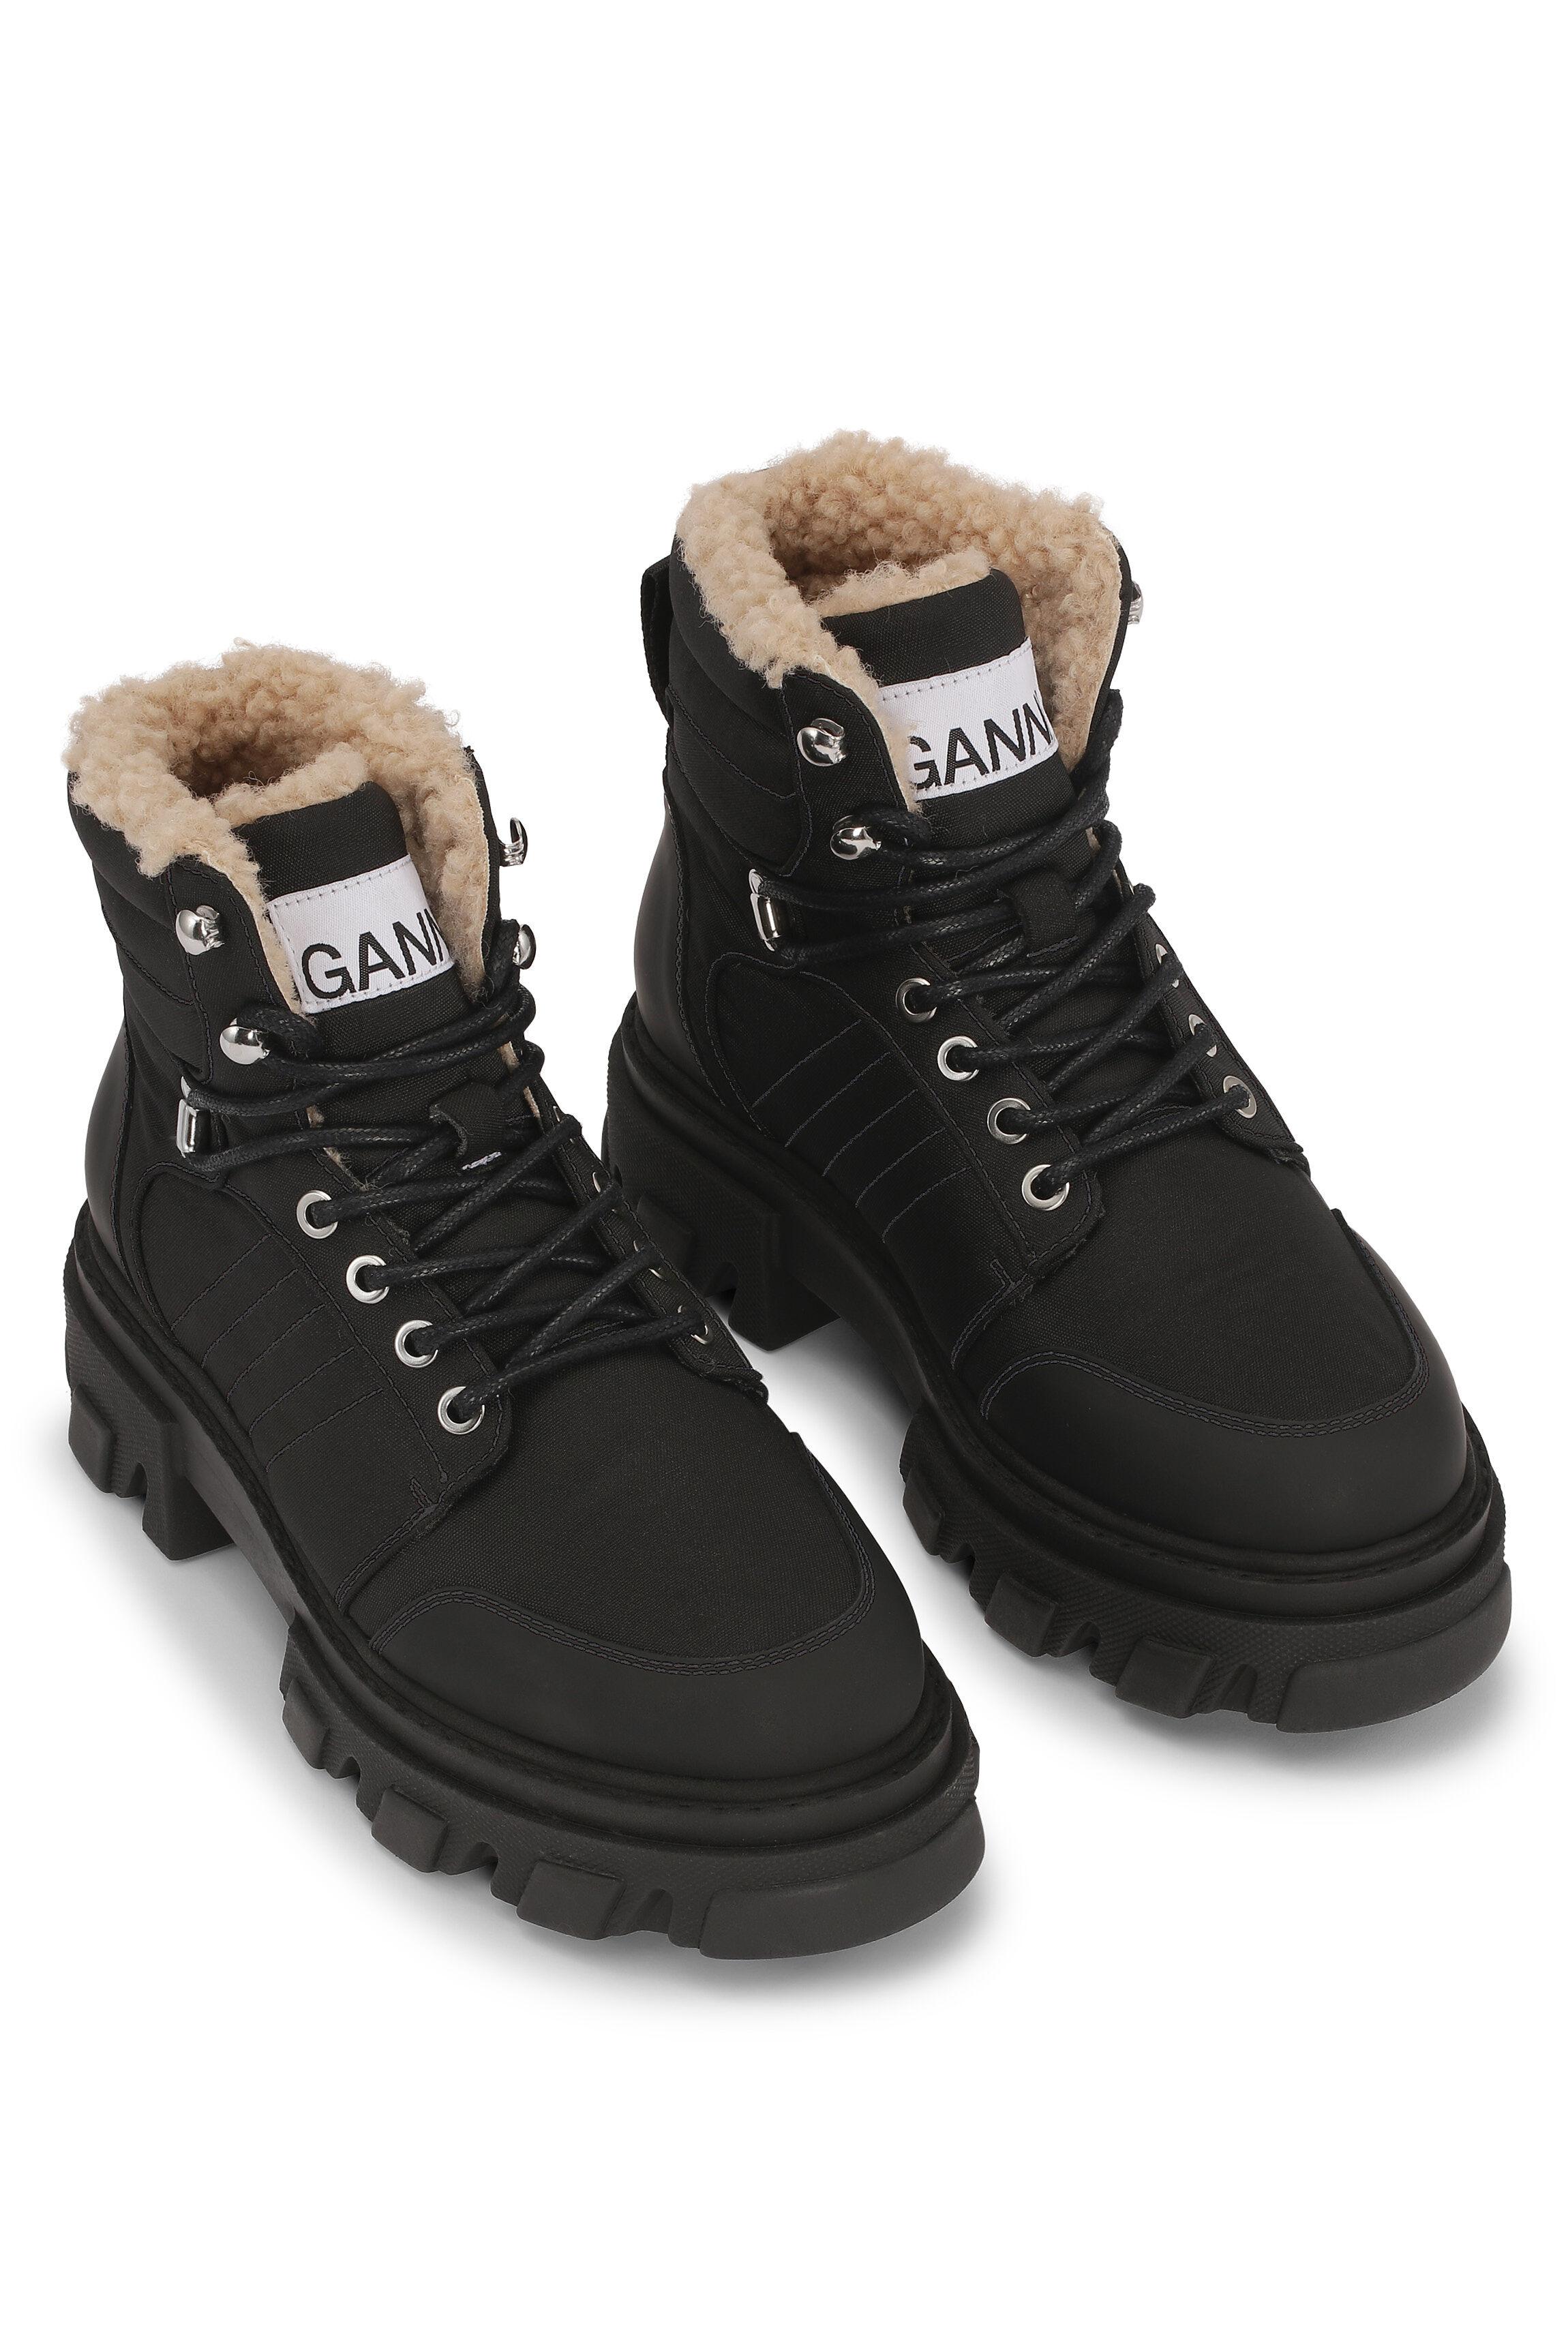 Ganni Lace-up Hiking Boots in Black | Lyst